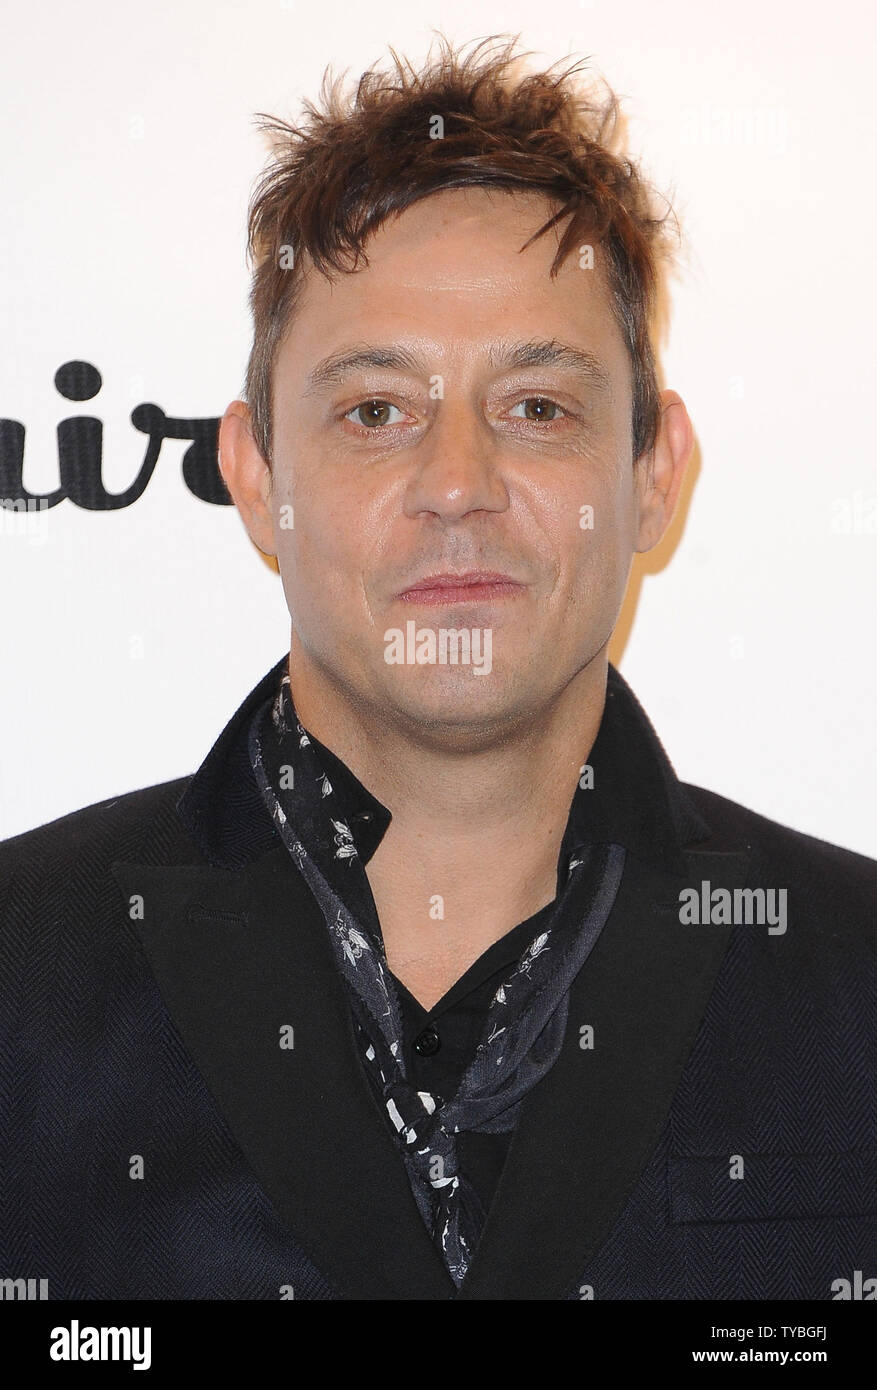 English singer/song writer and husband to Kate Moss Jamie Hince attends The Tommy Hilfiger and Esquire Party during London Collections: Men designer fashion event at The Zetter Townhouse, St John's Square, in London on January 7, 2013.     UPI/Paul Treadway Stock Photo